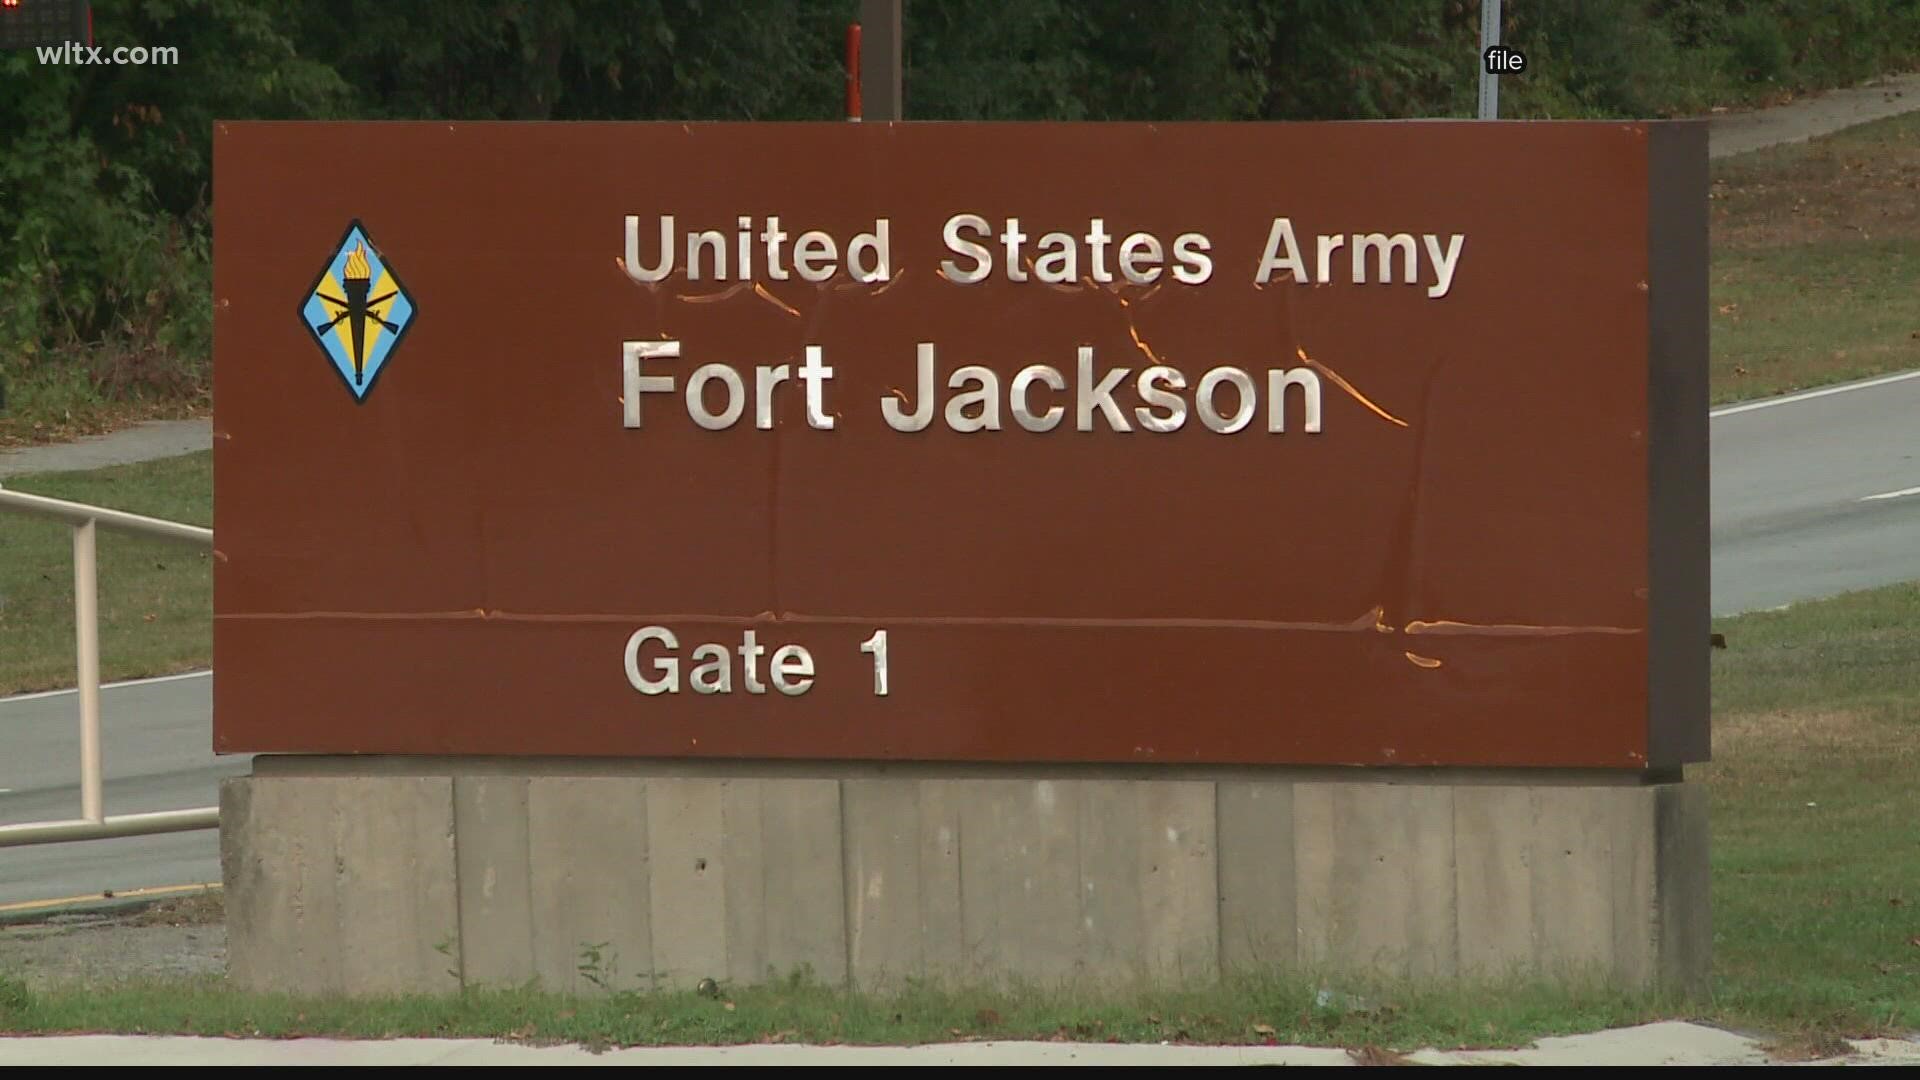 Fort Jackson will close its gates to visitors on Wednesday, May 18, to participate in a joint emergency active shooter exercise.